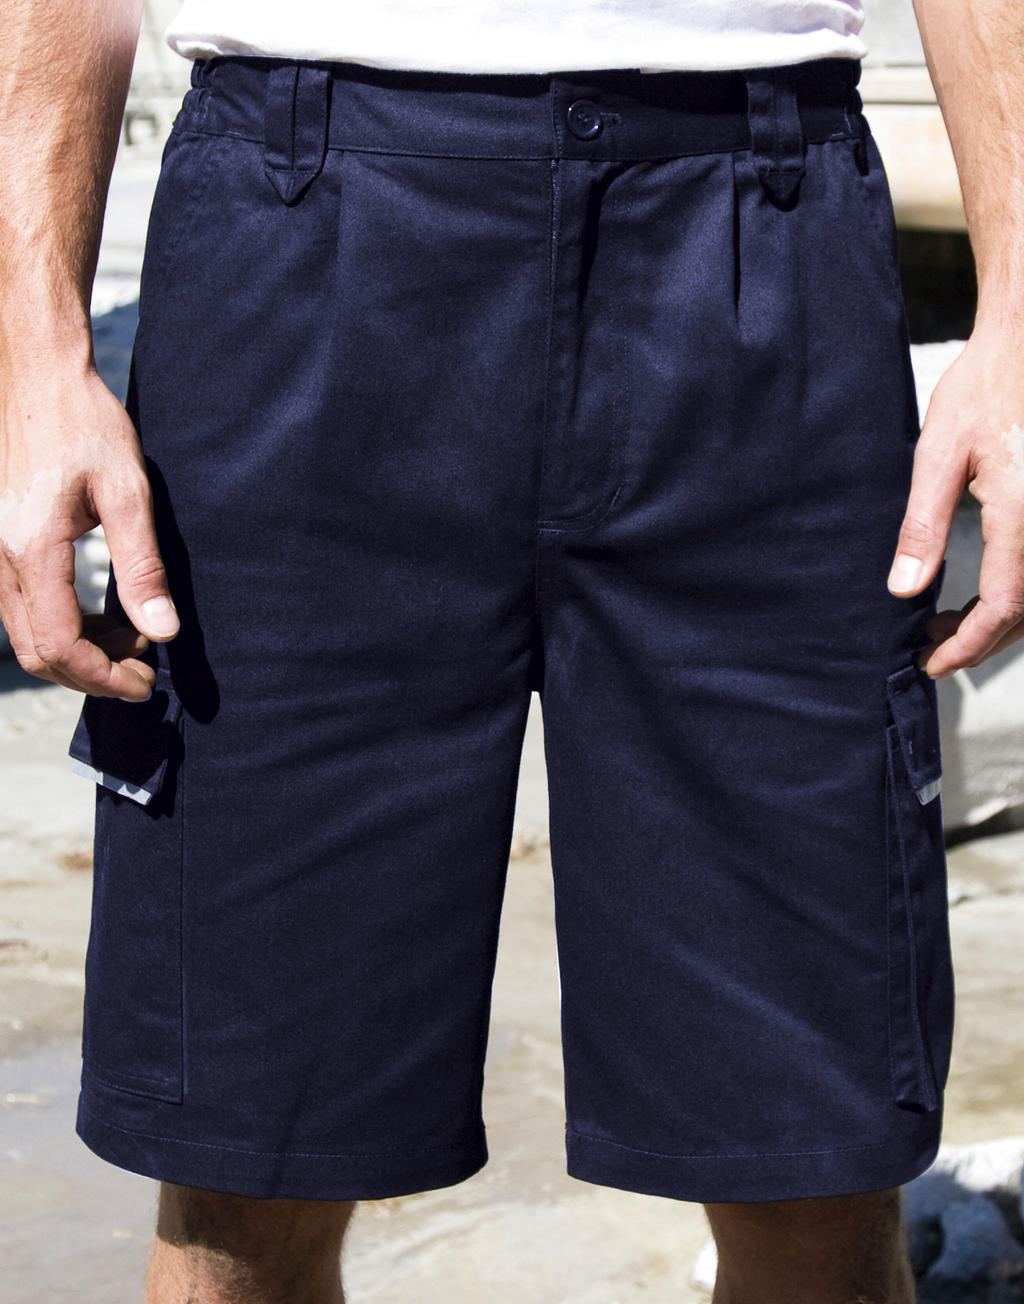  Work-Guard Action Shorts in Farbe Black